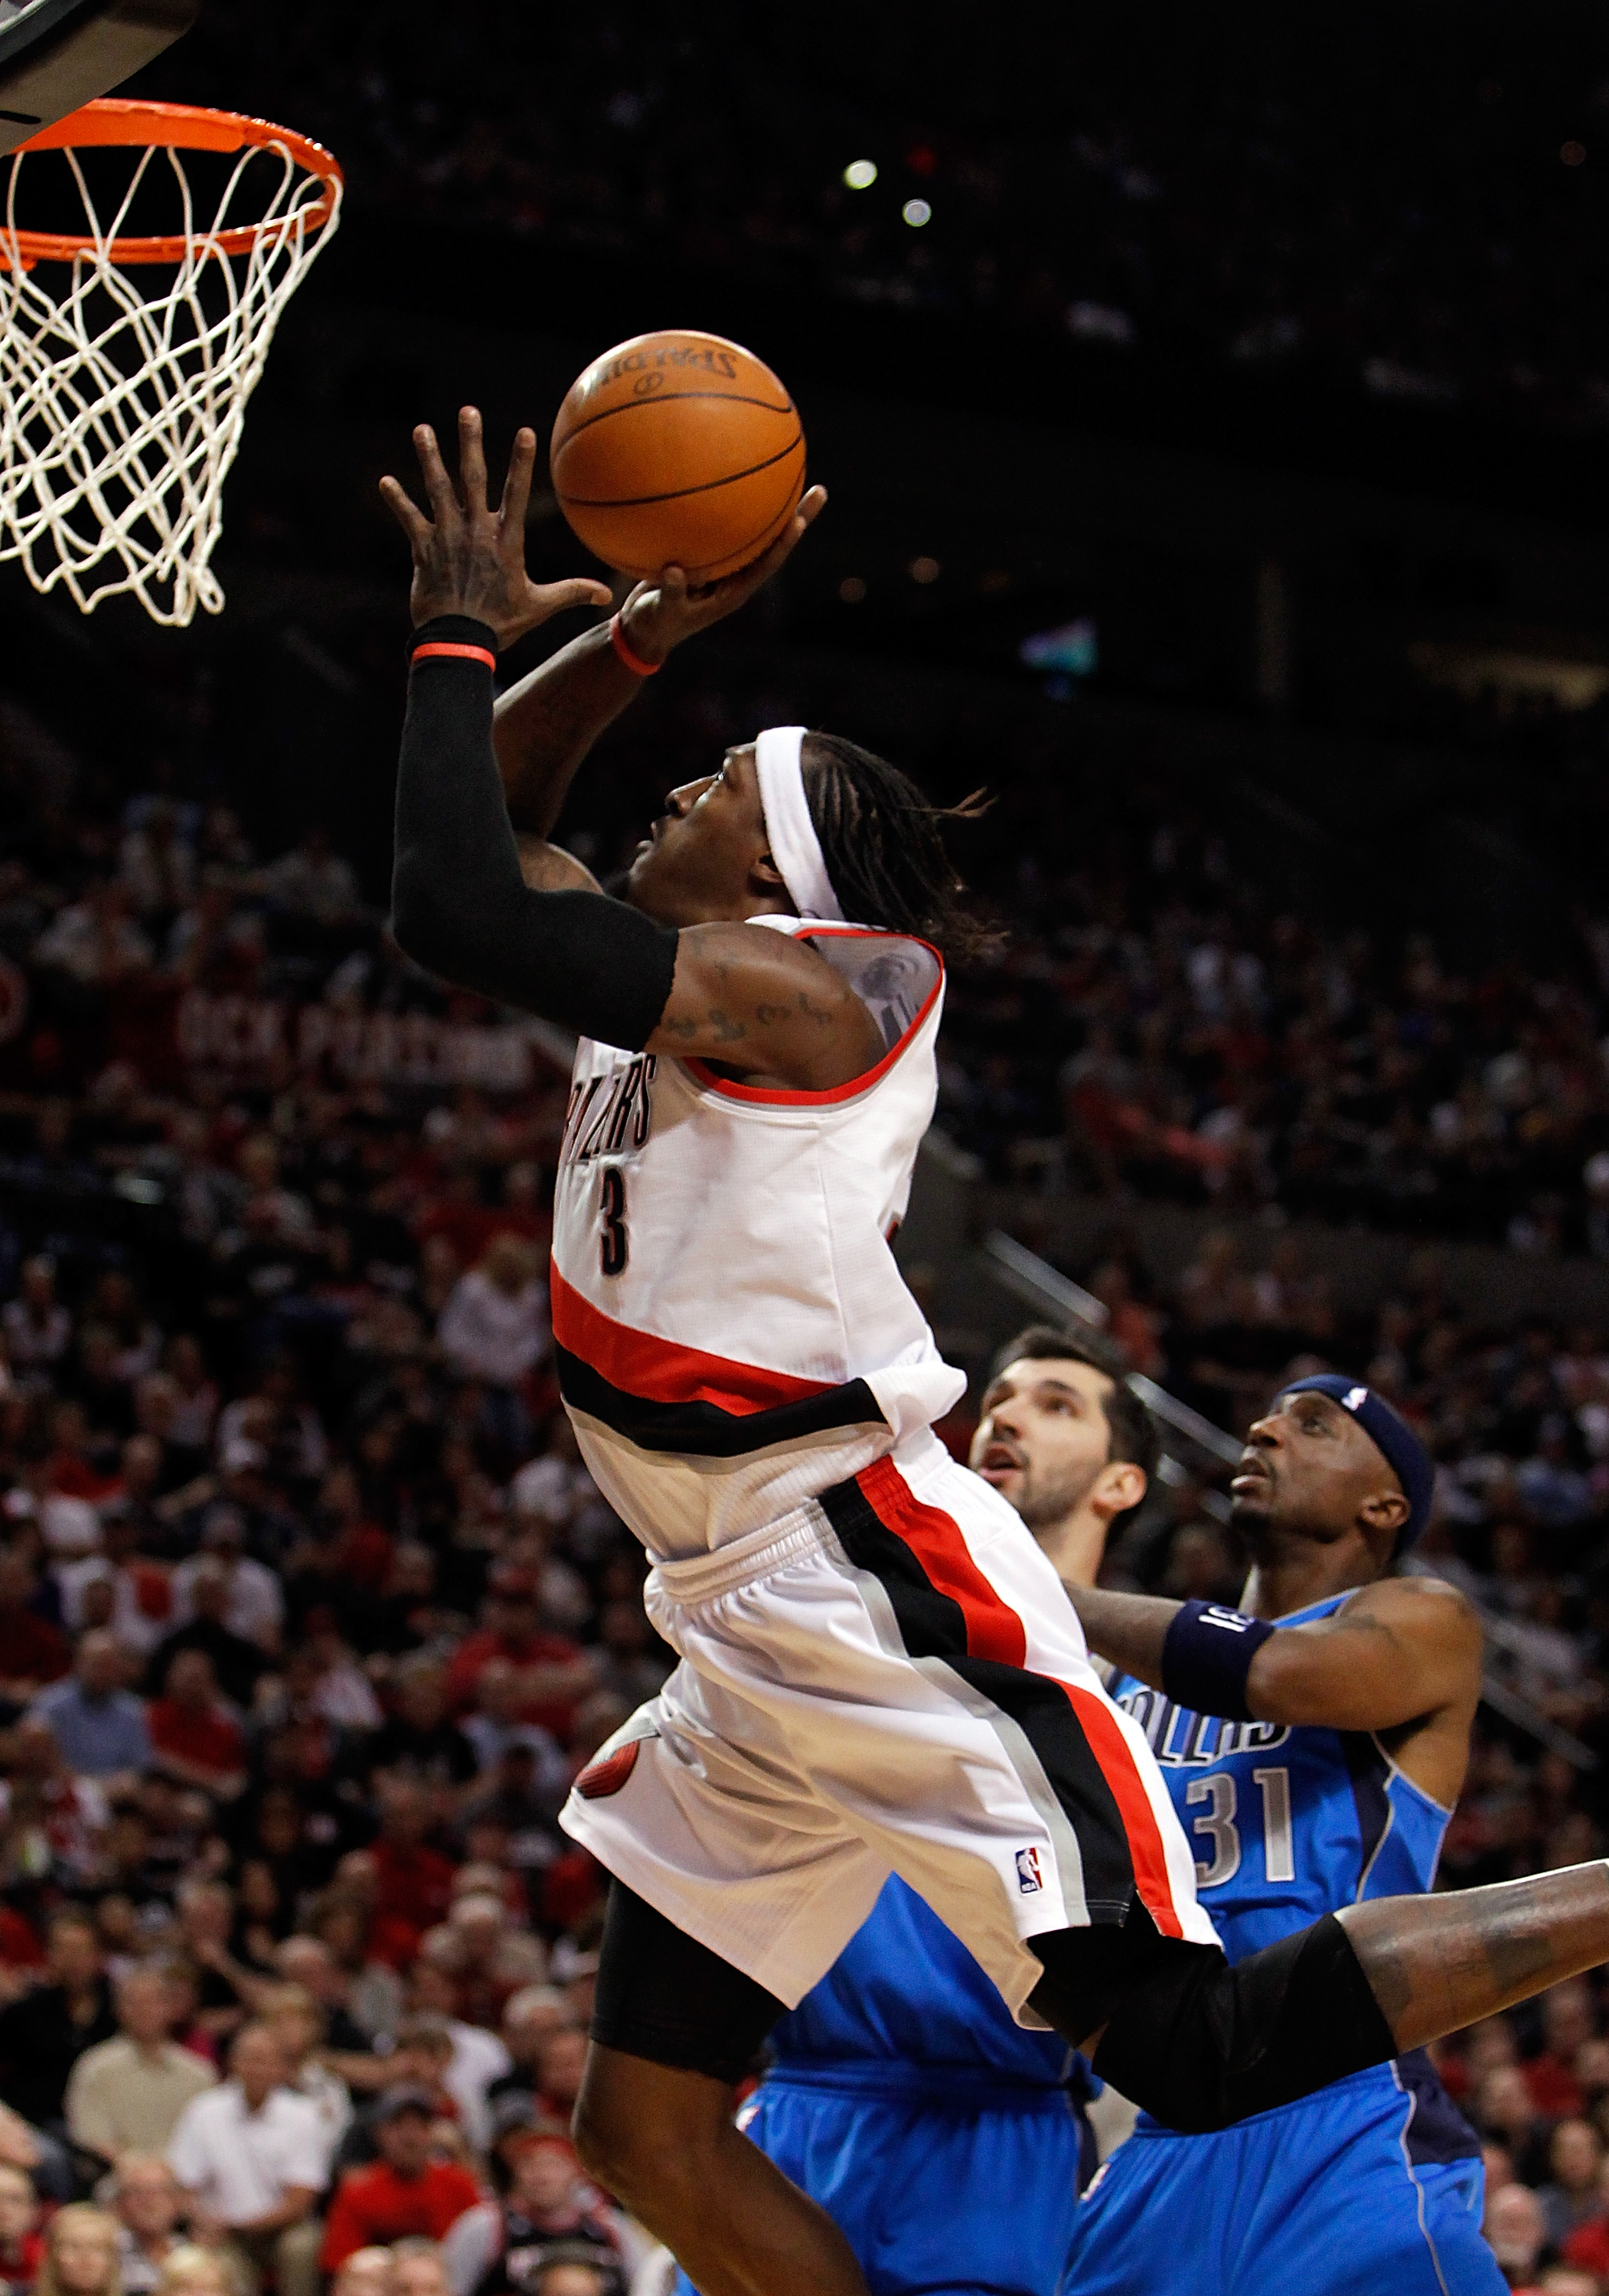 PORTLAND, OR - APRIL 23:  Gerald Wallace #3 of the Portland Trail Blazers lays up the ball against the Dallas Mavericks in Game Four of the Western Conference Quarterfinals in the 2011 NBA Playoffs on April 23, 2011 at the Rose Garden in Portland, Oregon.